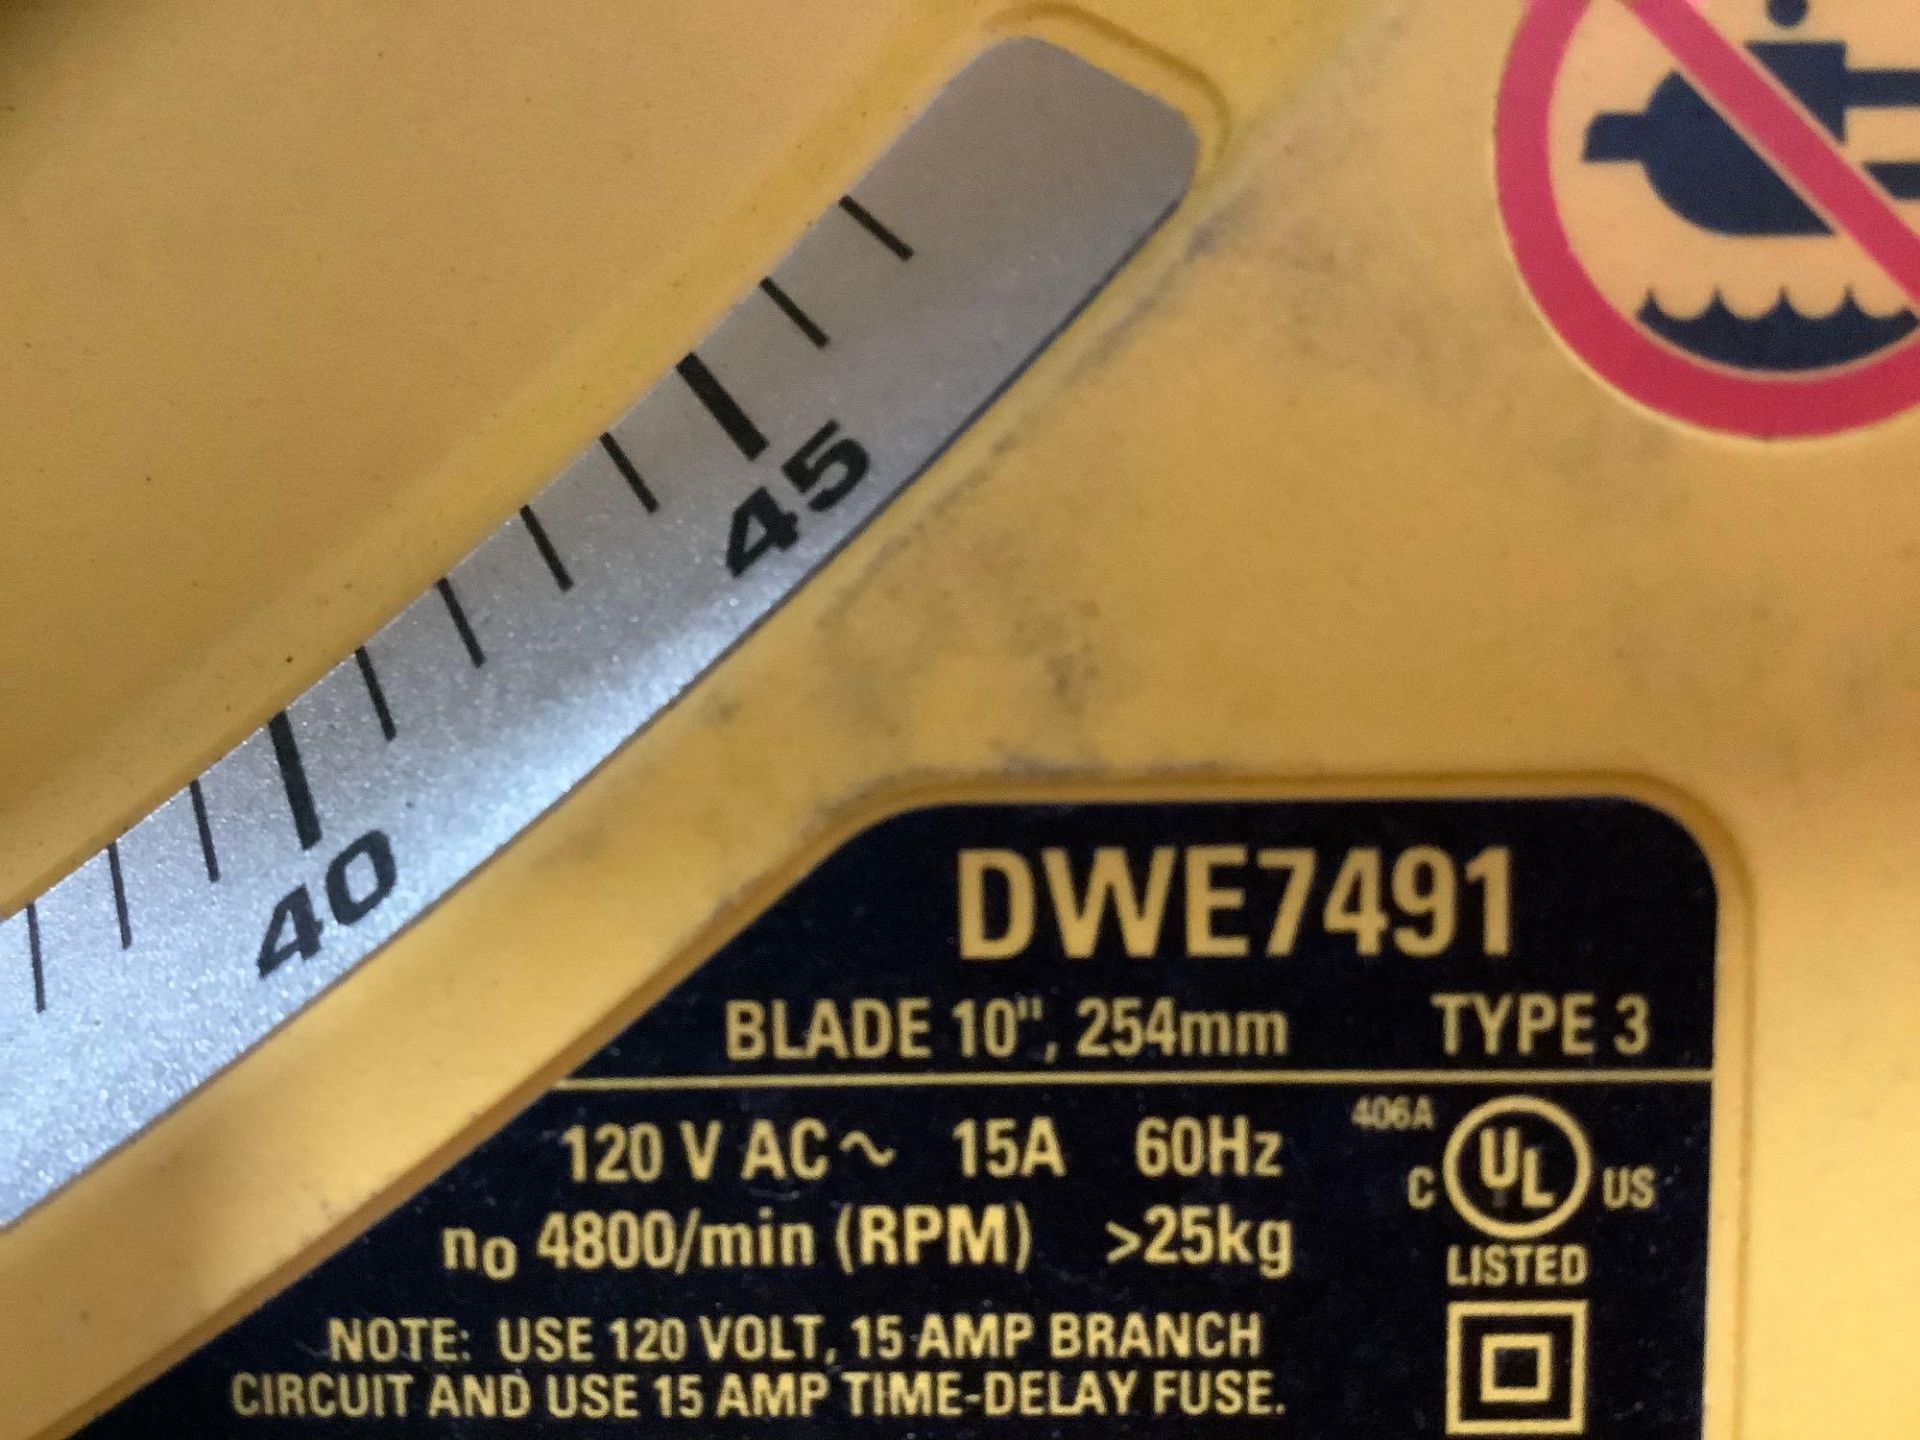 DEWALT PORTABLE TABLE SAW TYPE 3 MODEL DWE7491, ELECTRIC, APPROX BLADE 10”, APPROX 4800 RPM, RUNS AN - Image 11 of 12